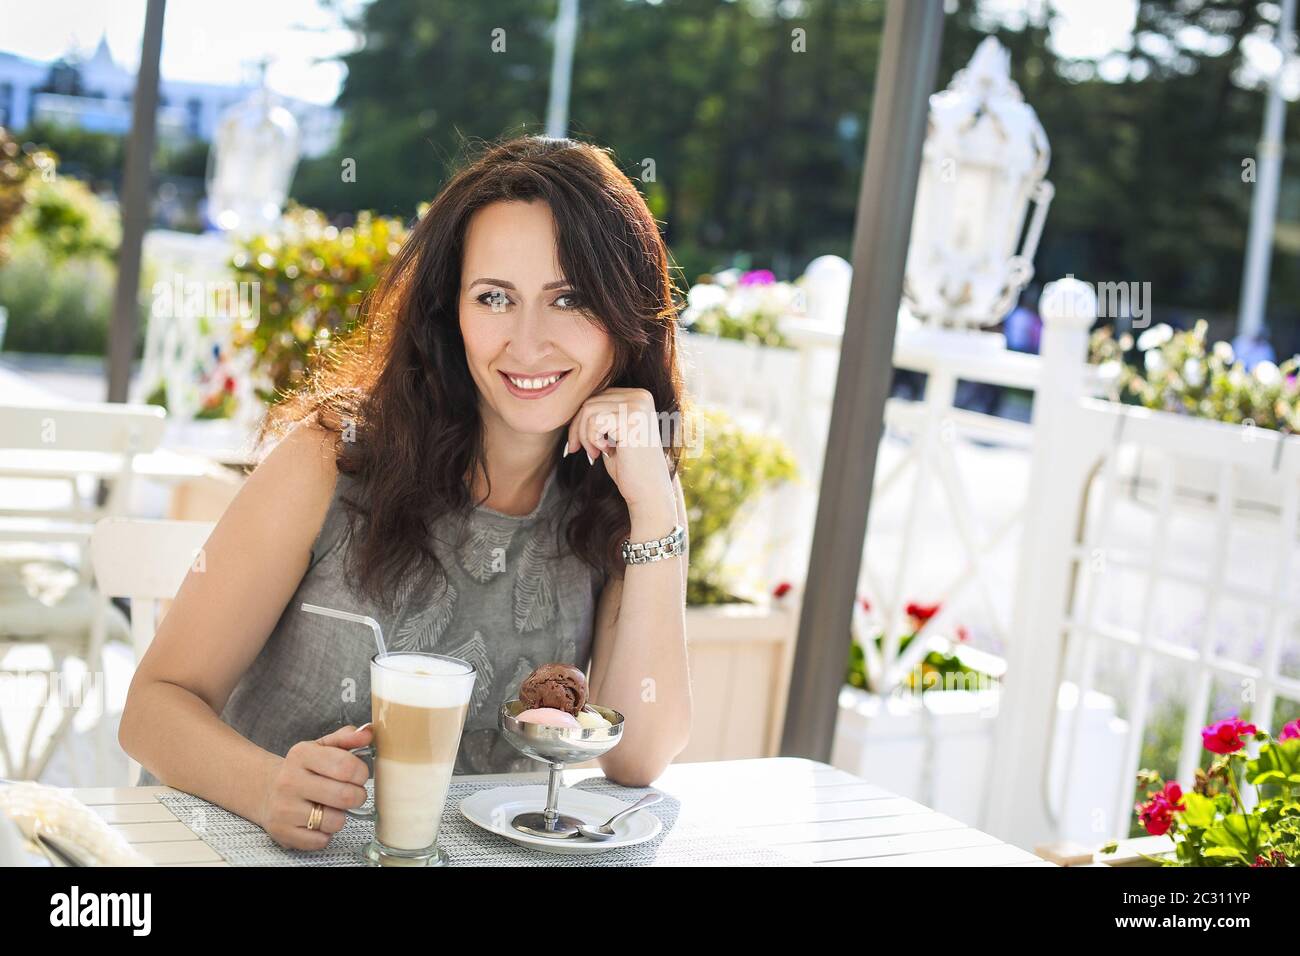 Woman drinking latte coffee and eating ice cream in outdoor cafe Stock Photo